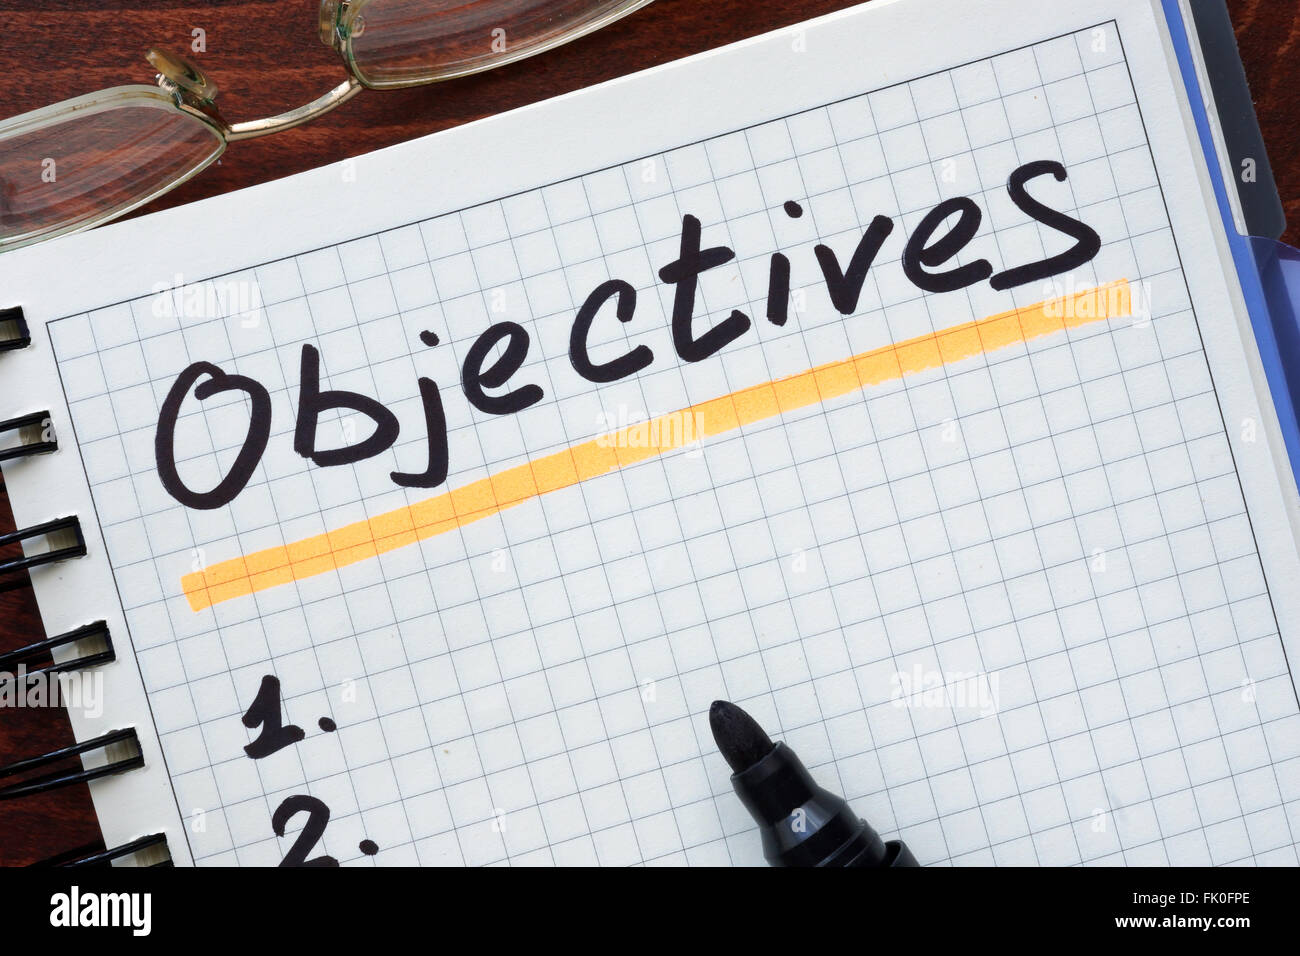 Objectives concept  written in a notebook on a wooden table. Stock Photo